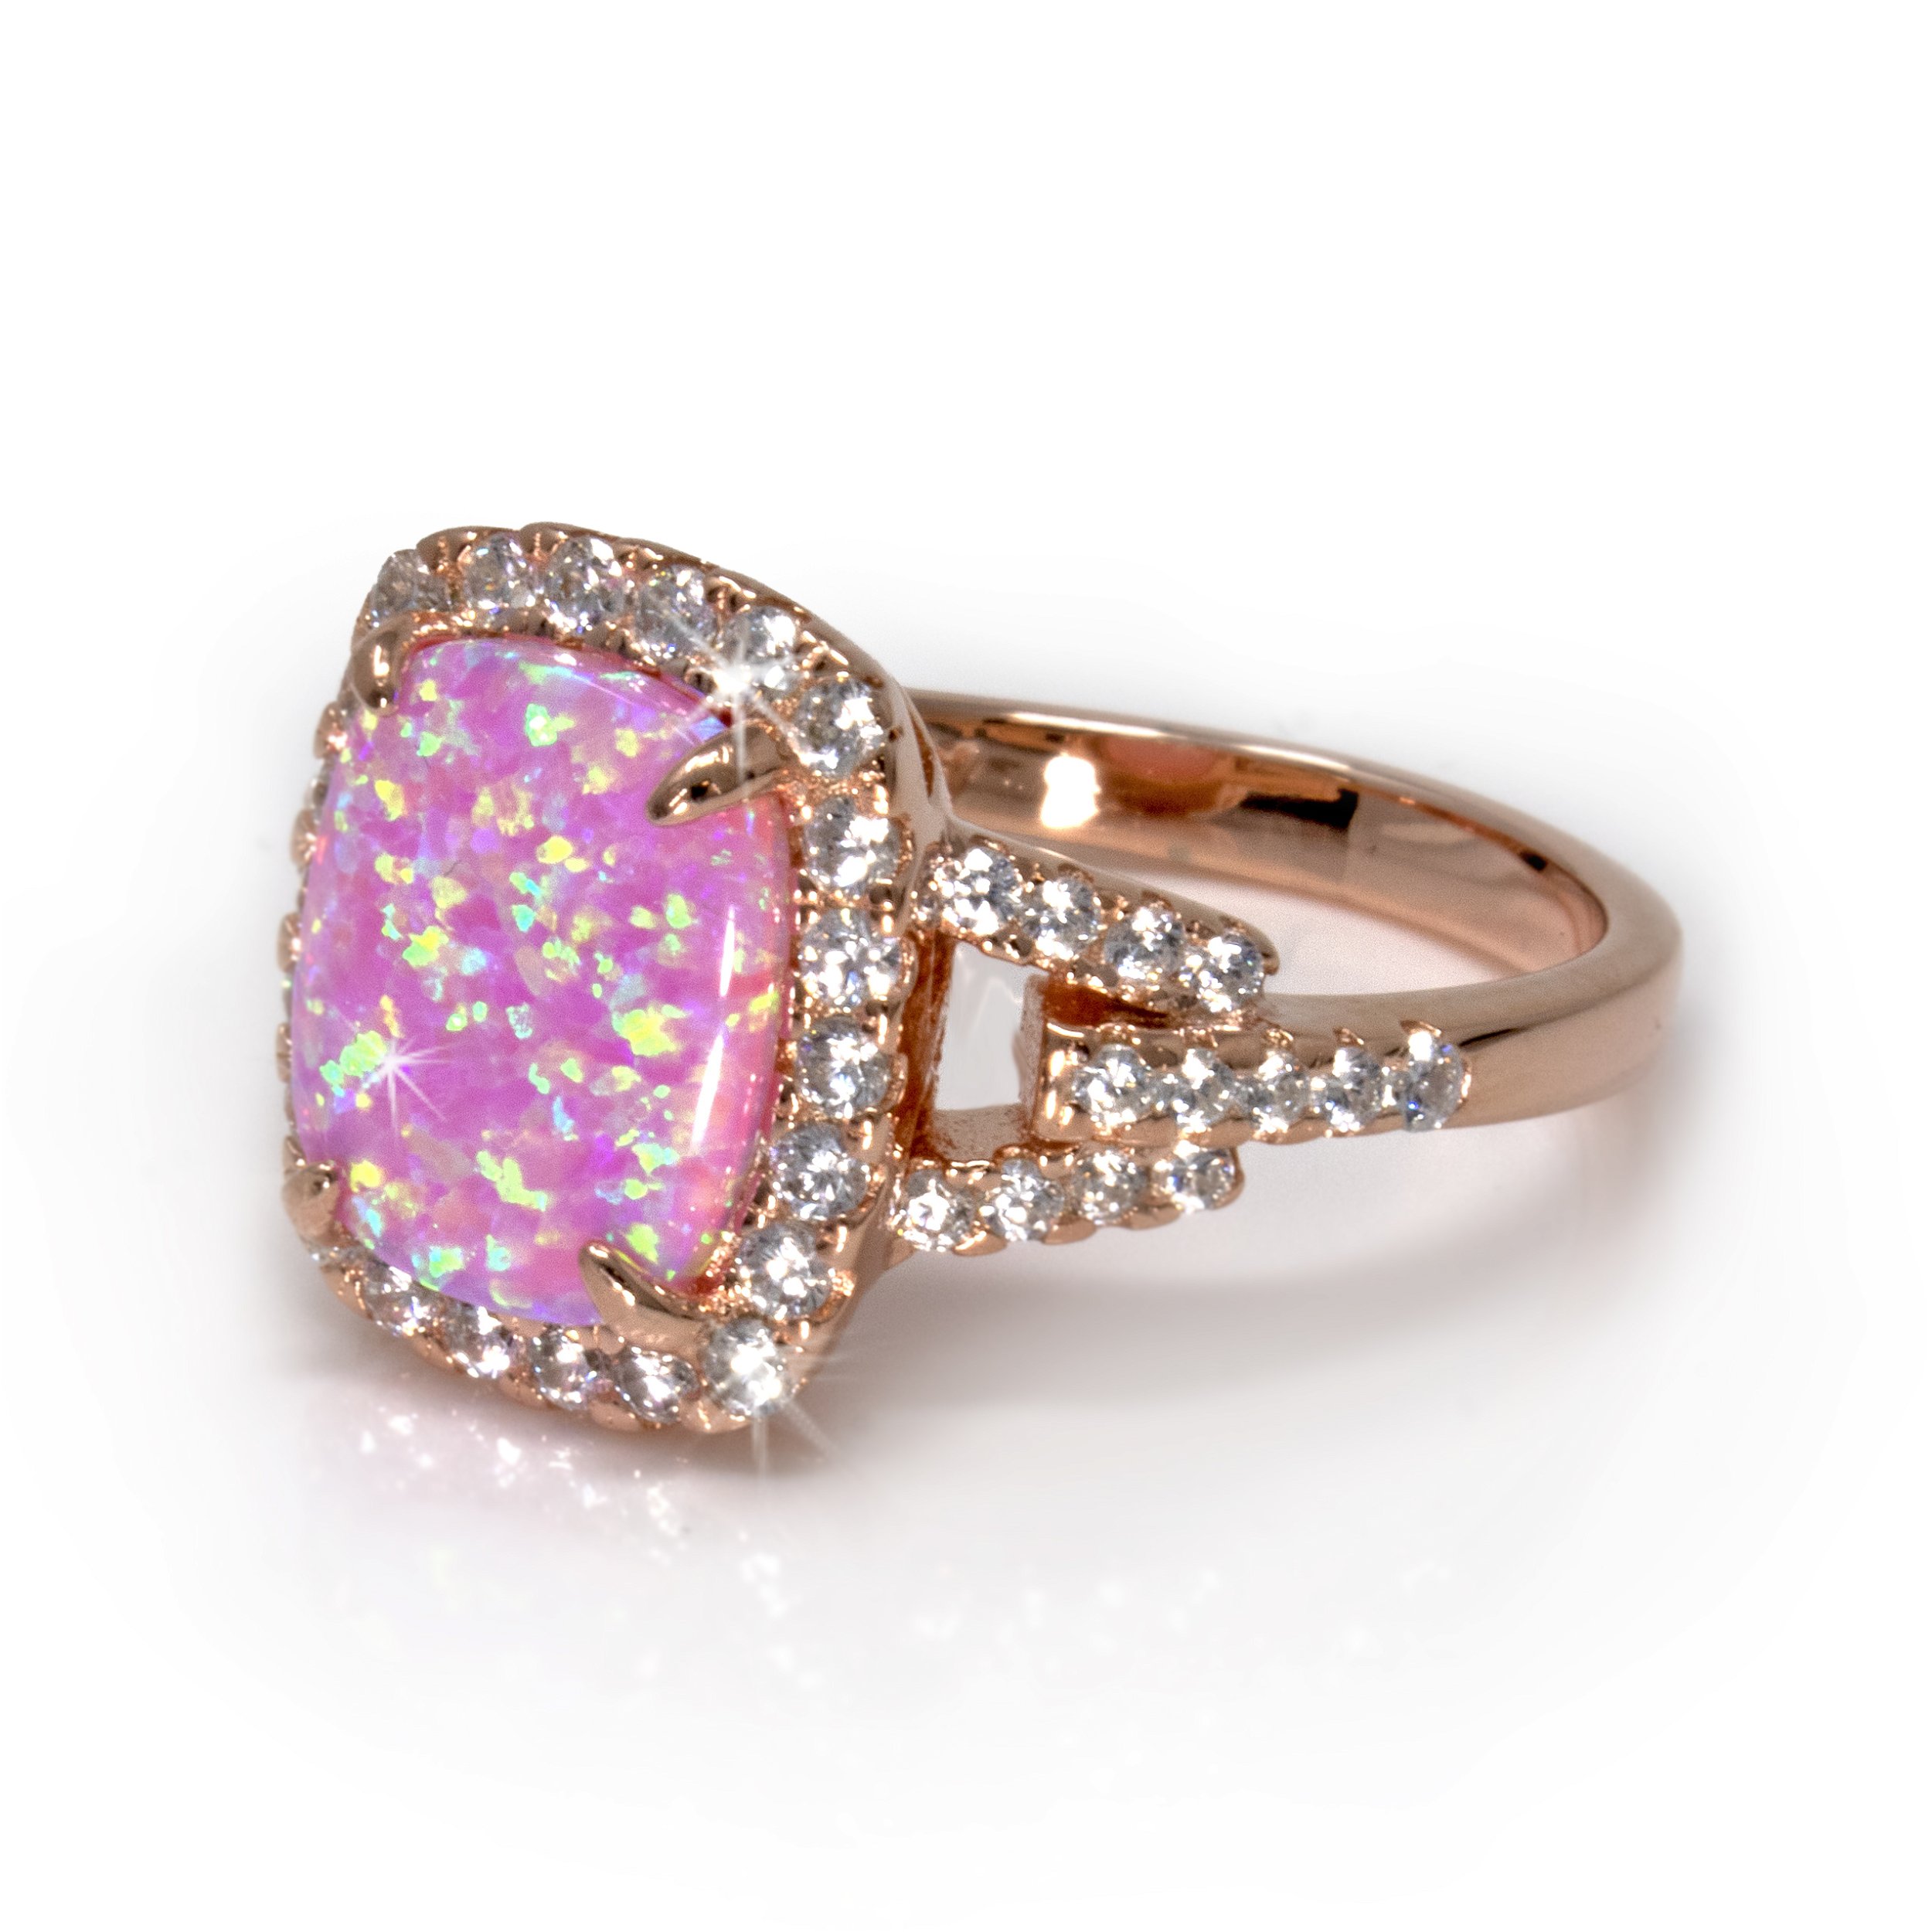 Pink Opal Ring Size 9 - Rounded Square Cabochon With Bezel Set White Czs - Prong Set - Rose Gold Overlay